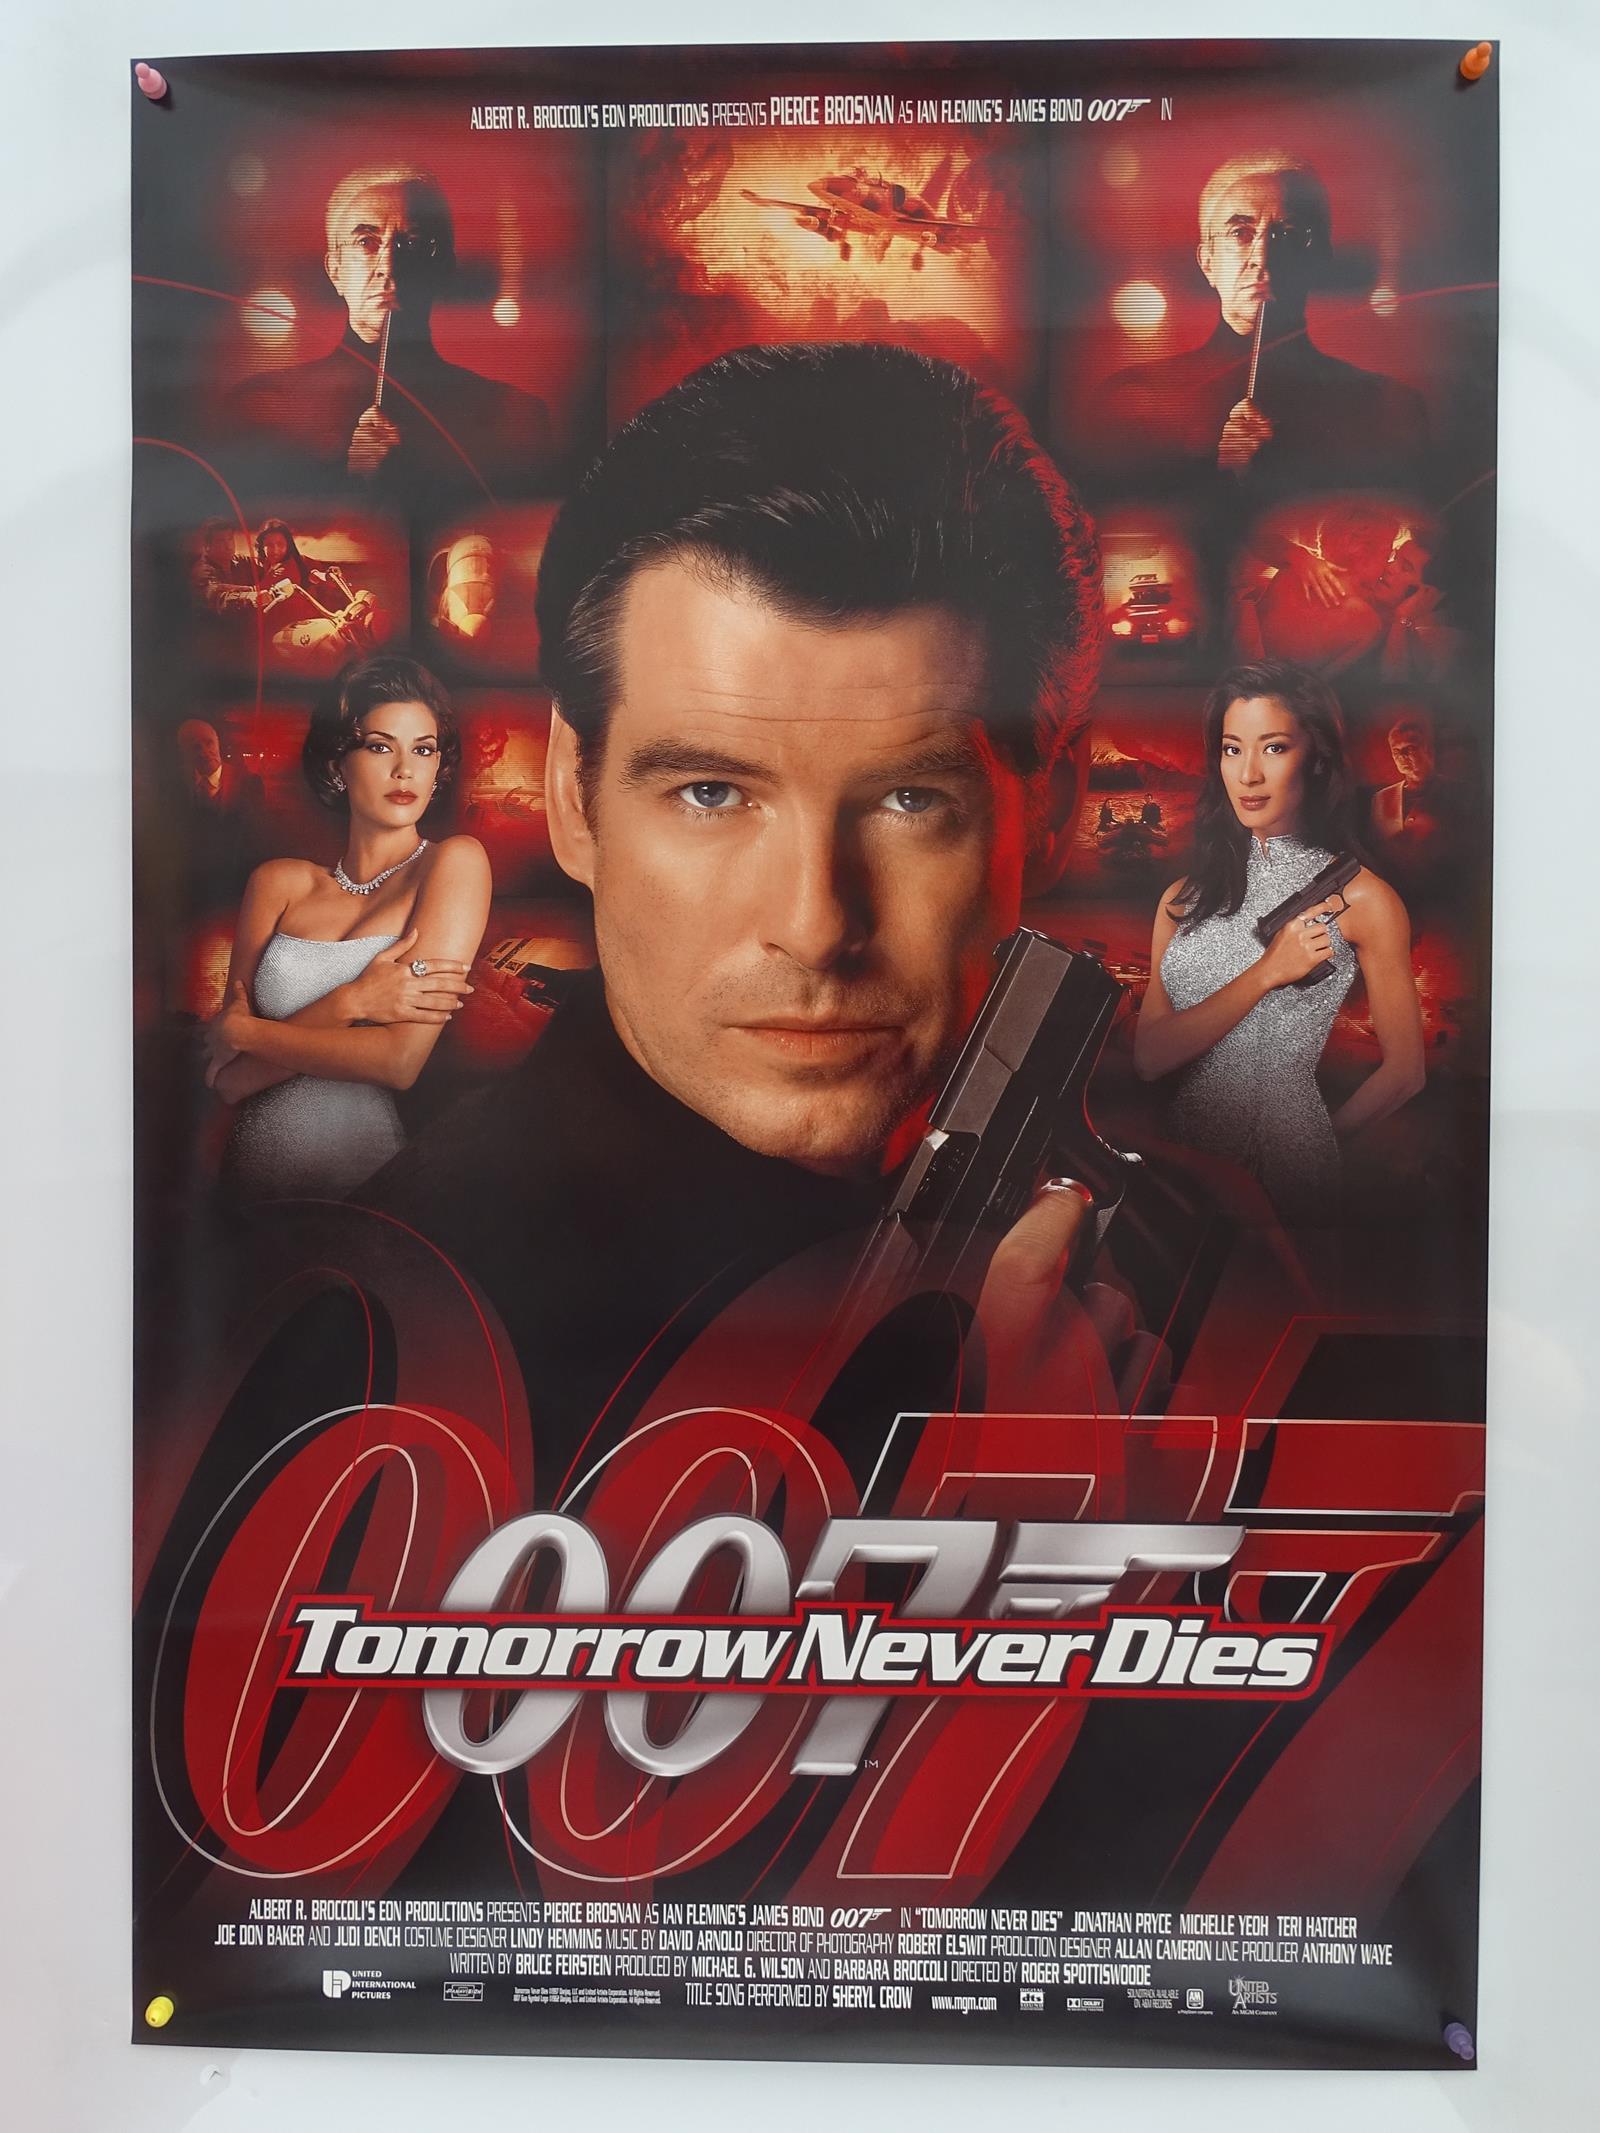 JAMES BOND: TOMORROW NEVER DIES (1997) Lot of 3 to - Image 3 of 3